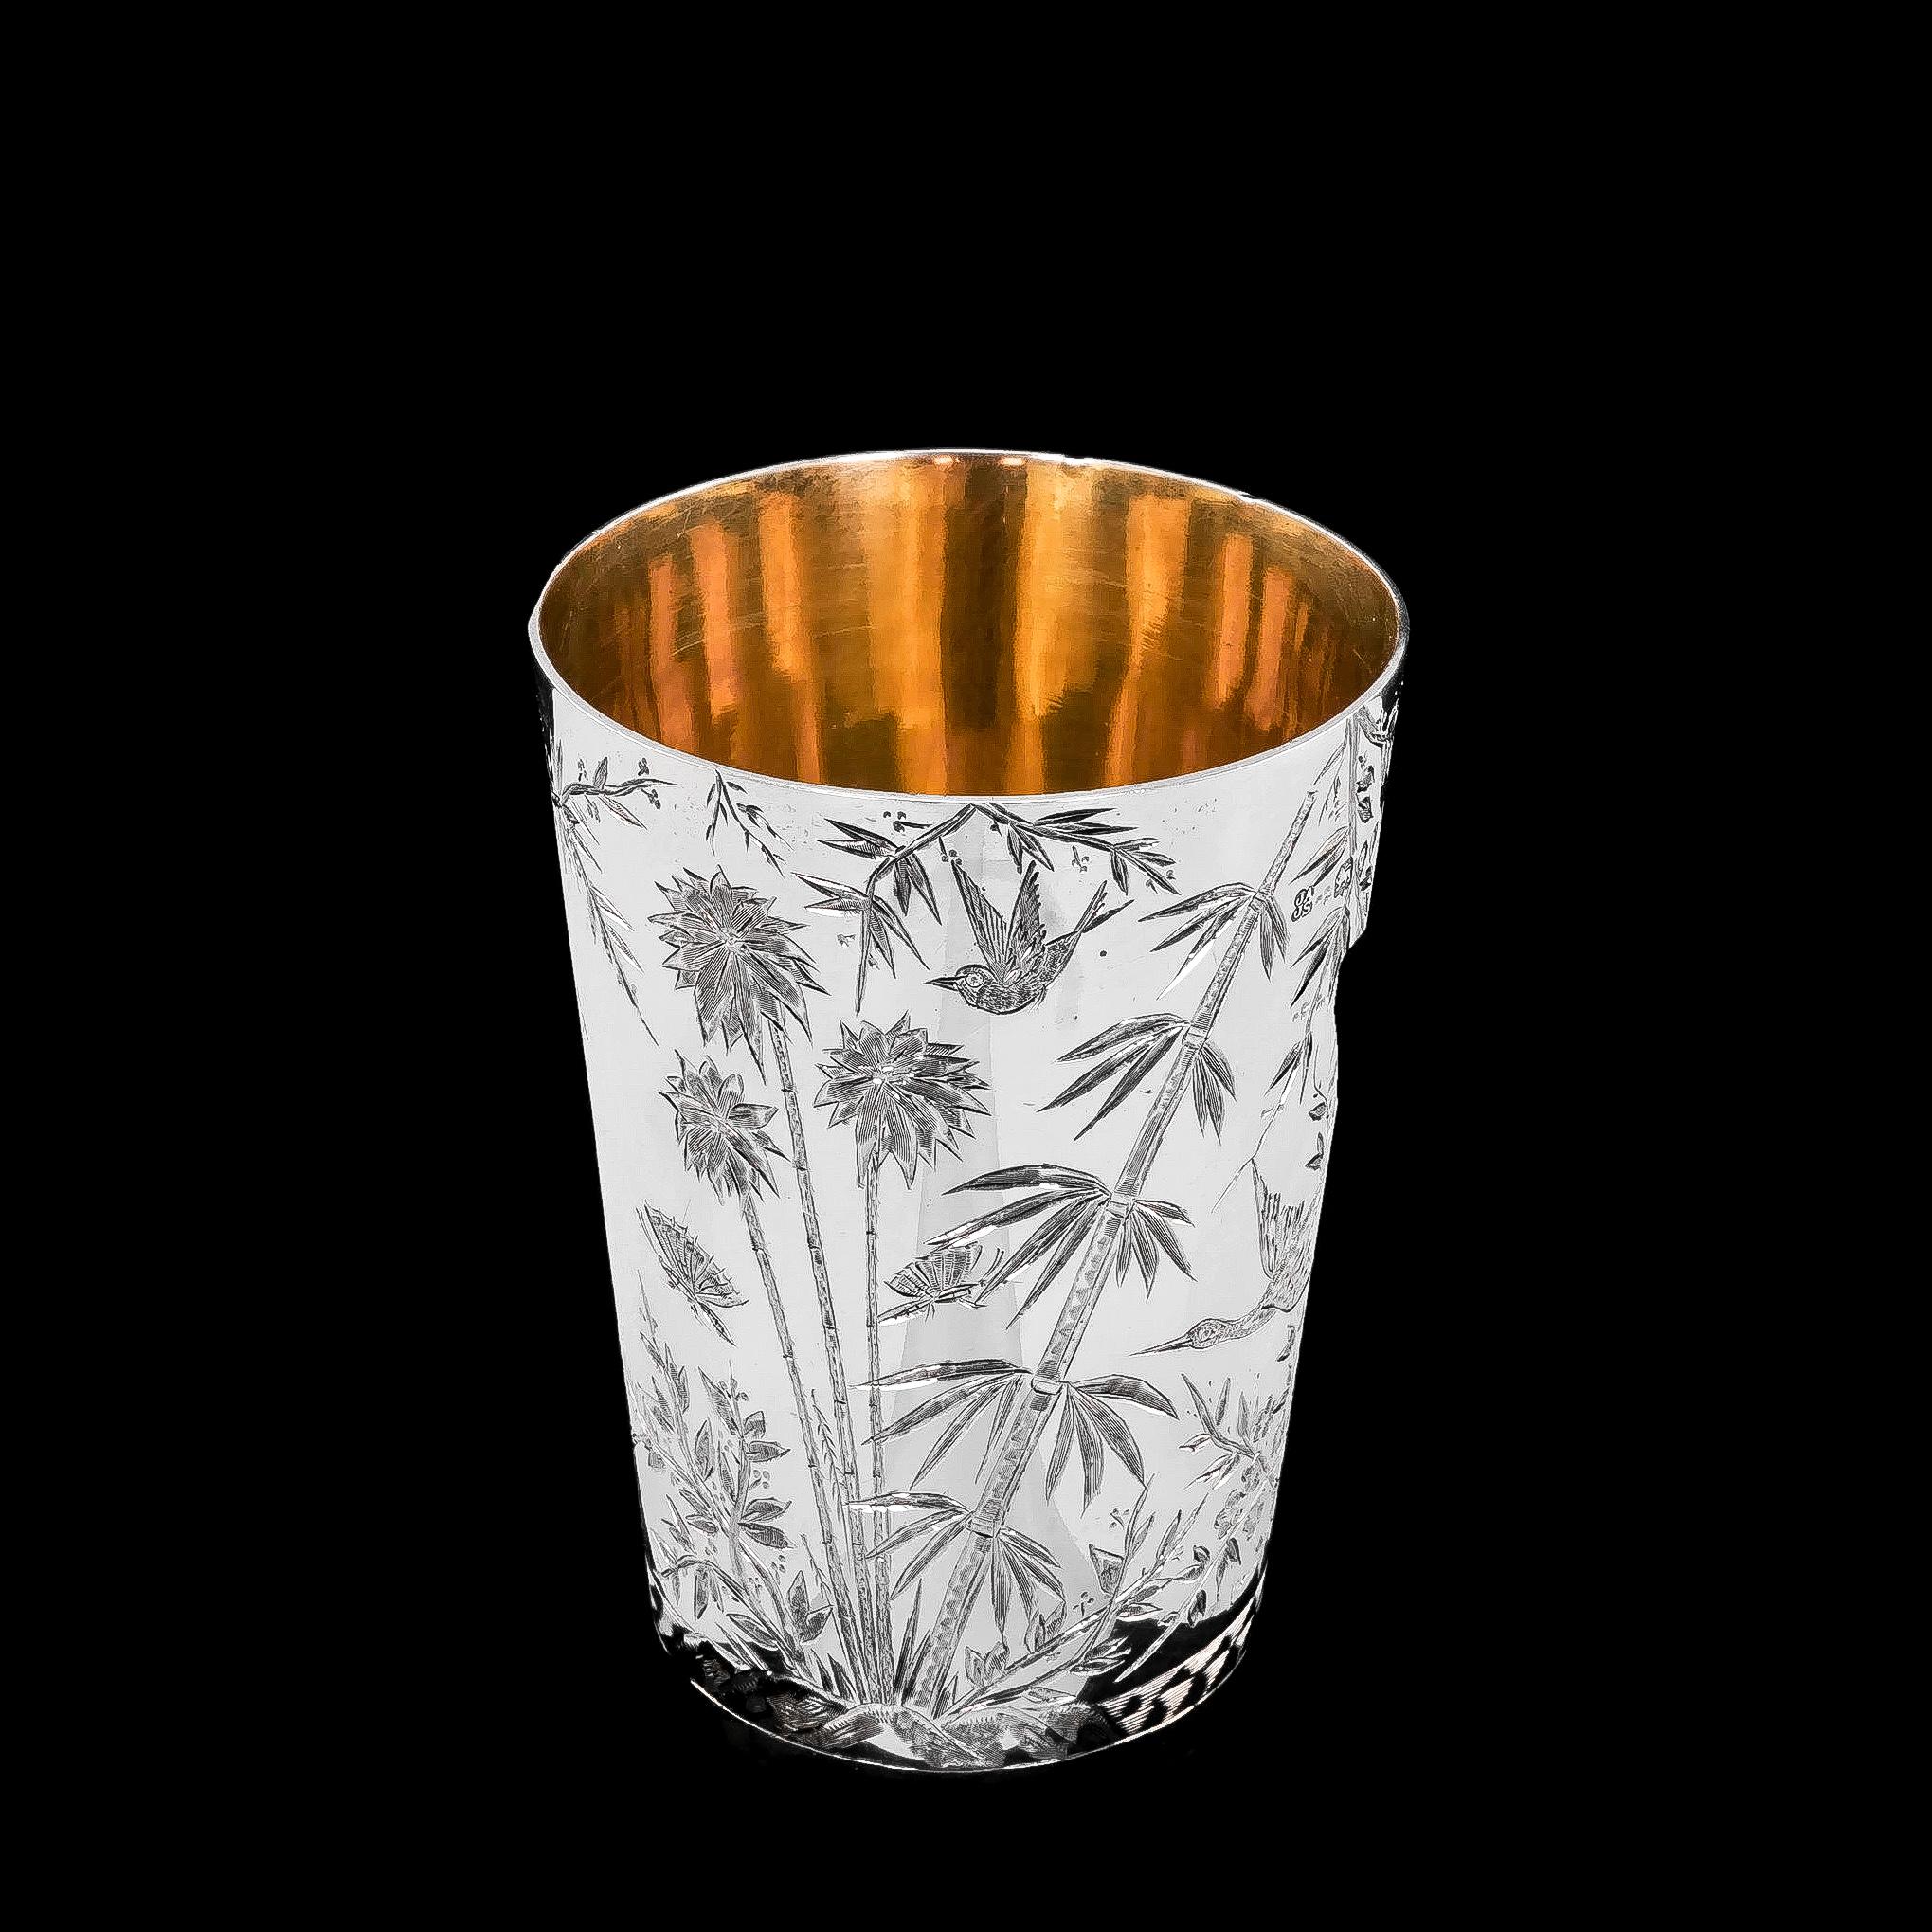 Sterling Silver Antique Solid Silver Aesthetic Style Beaker/Cup, John Adlwinckle & James Slater